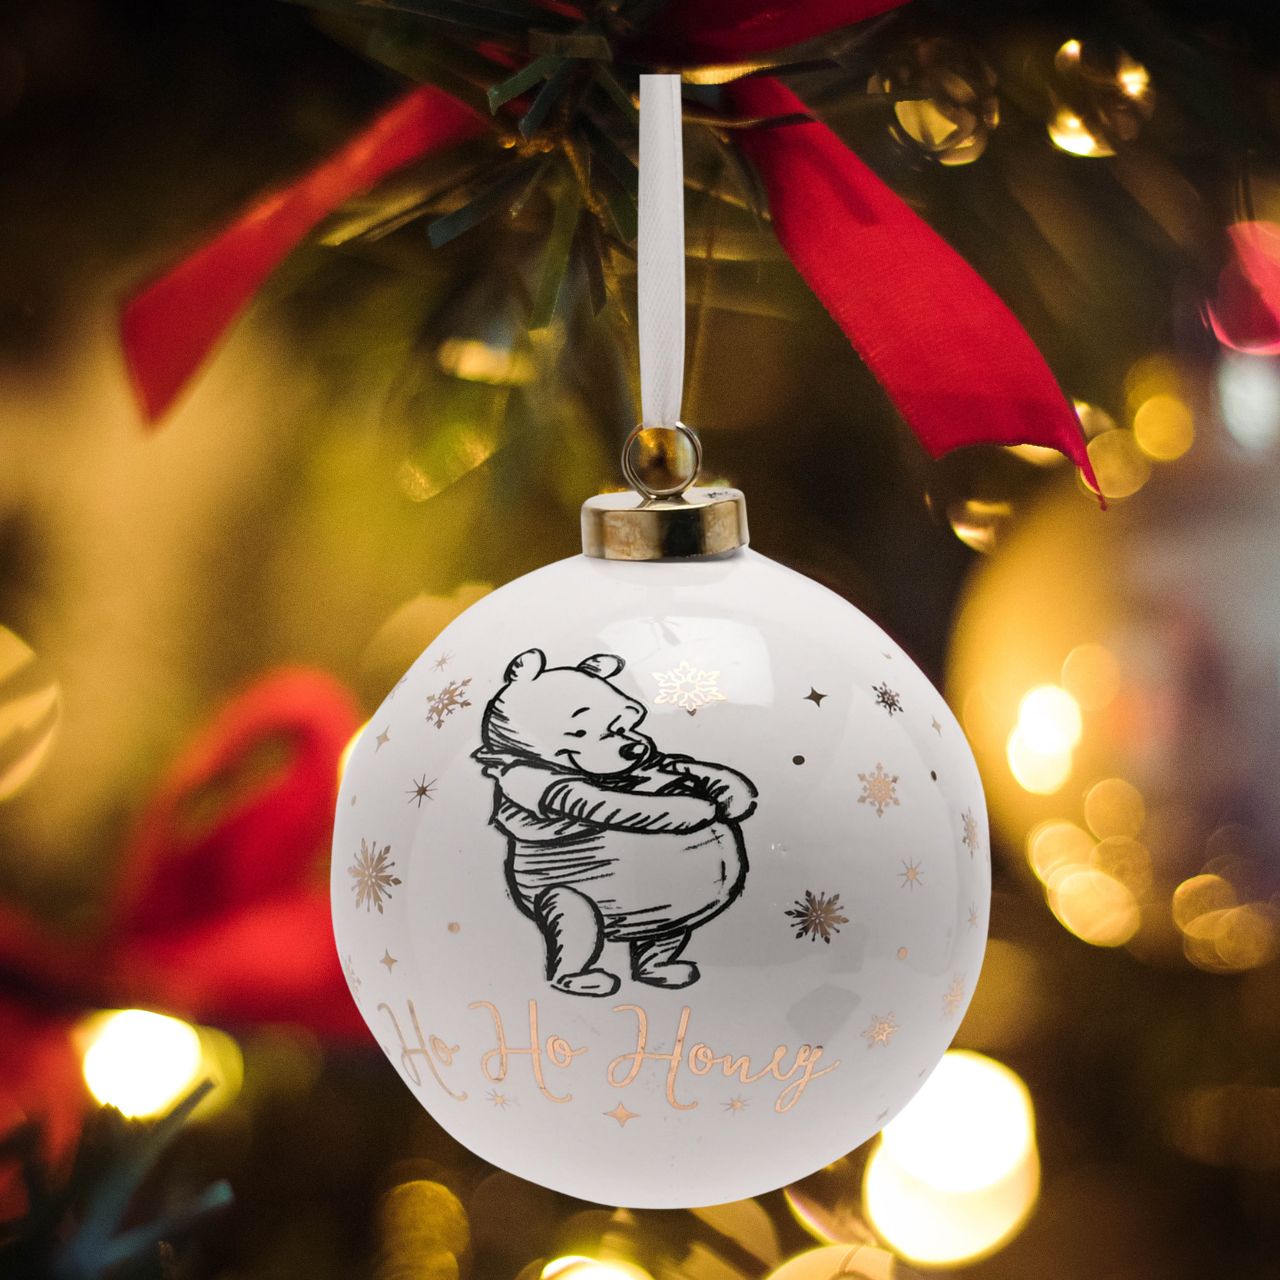 Disney Ceramic Christmas Bauble Winnie the Pooh  Bring touch of timeless Disney magic to the Christmas tree with this elegant gold foiled ceramic collectable Winnie the Pooh bauble. From Disney Classic Collectables - luxurious collectable gifts for the enduring Disney fan.